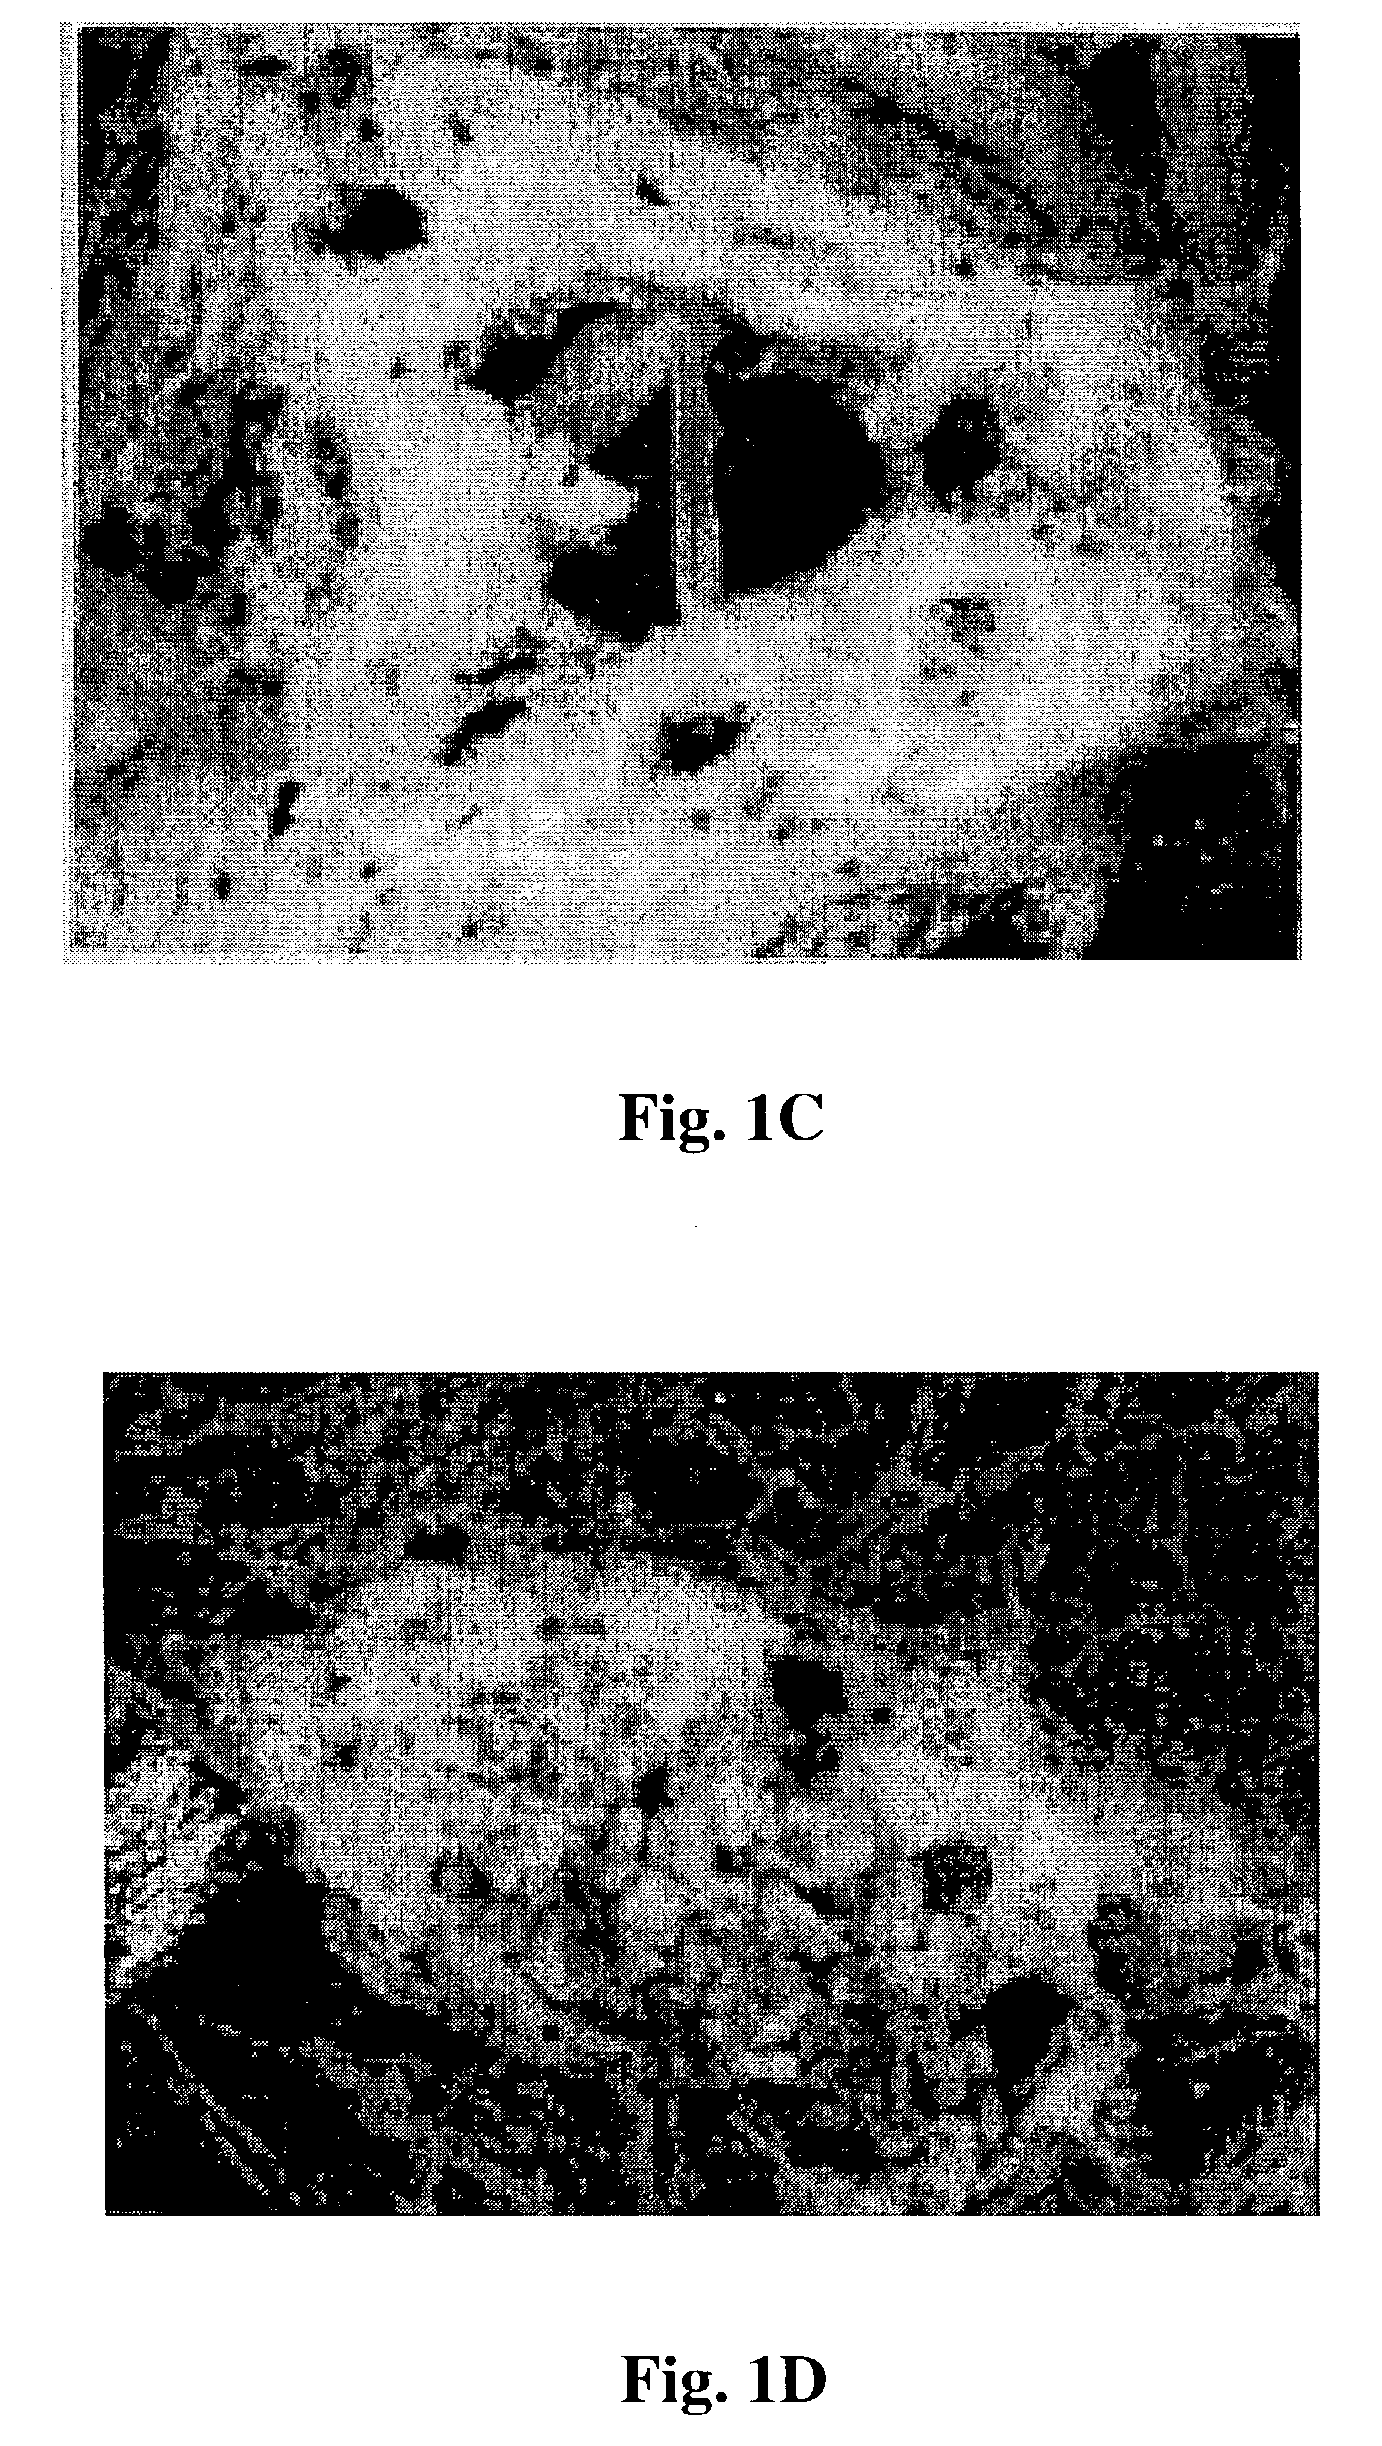 Juvenile hormone compositions and methods for making same